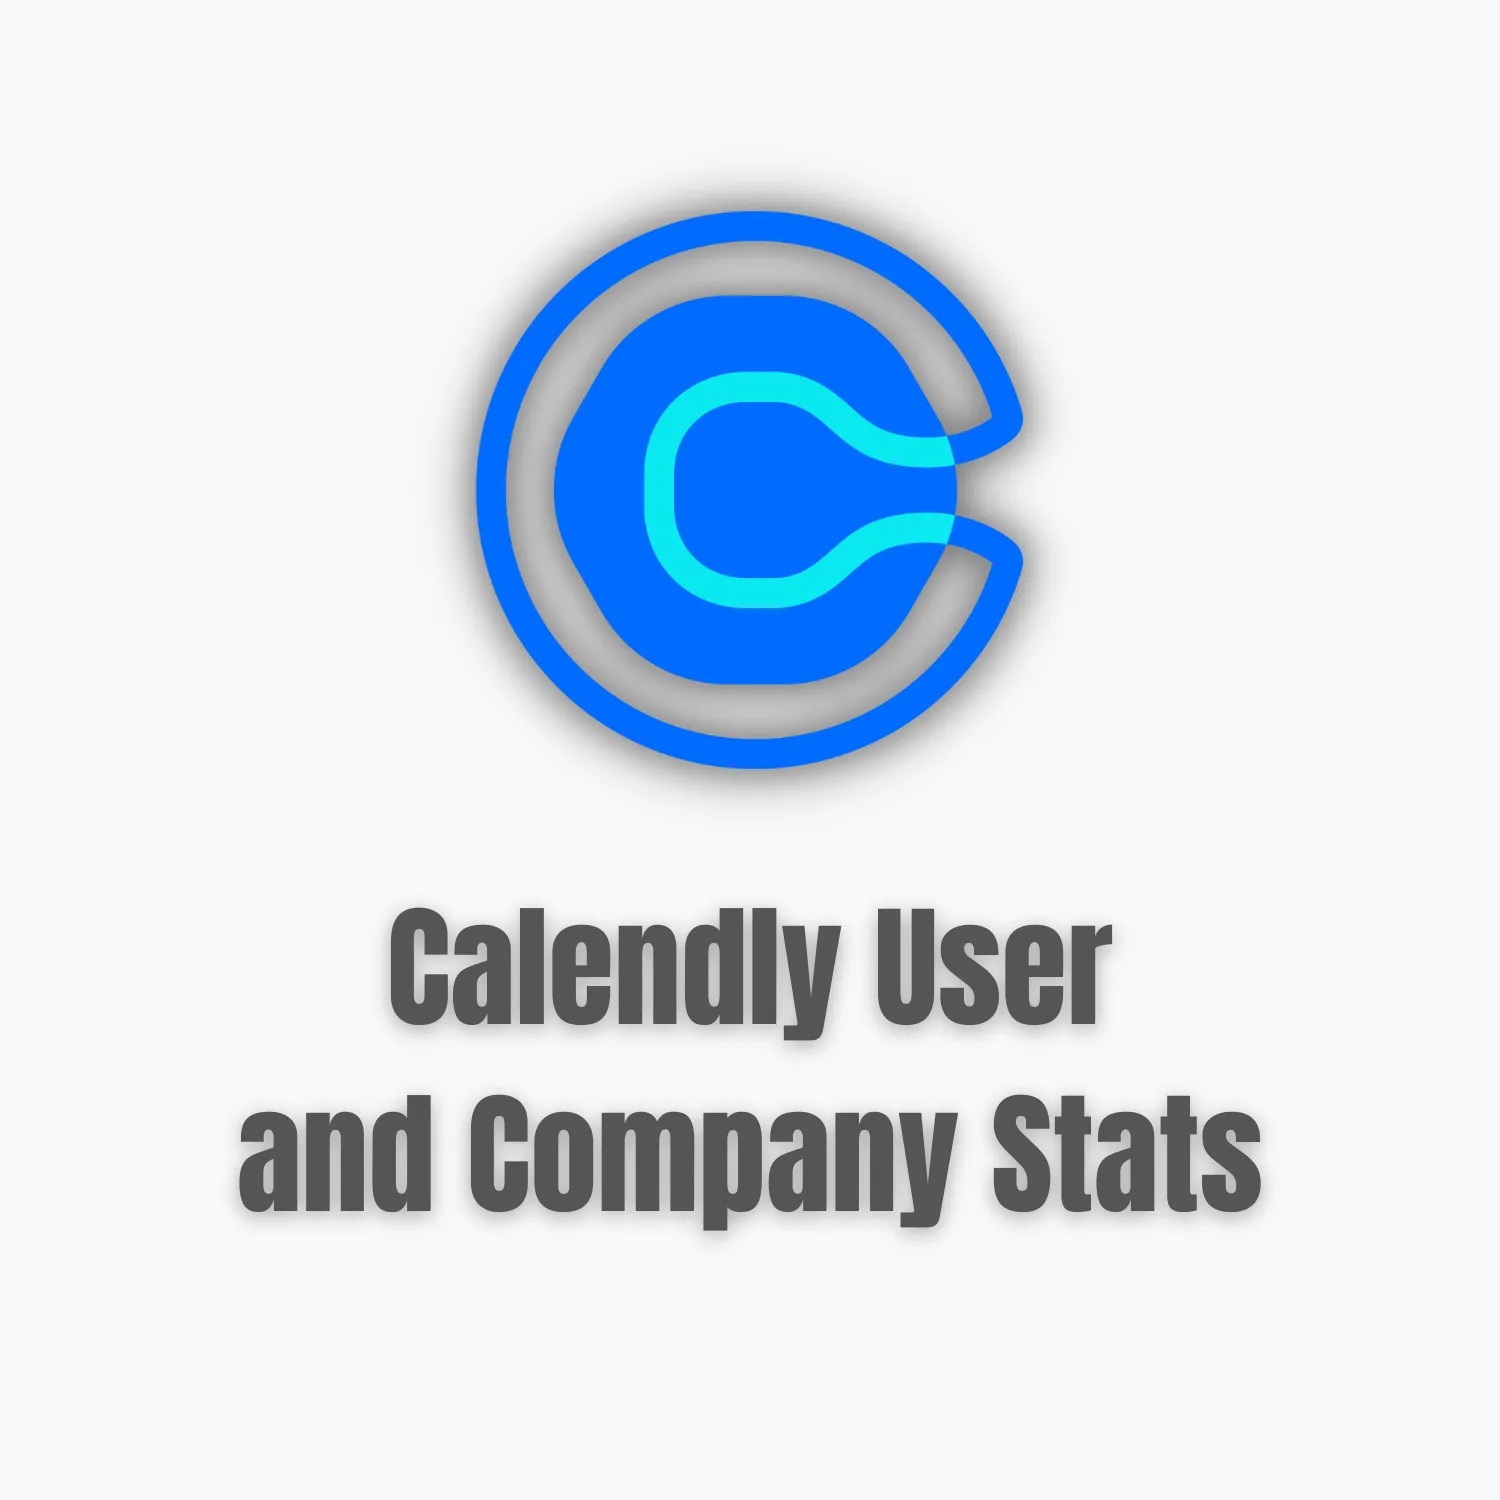 Calendly User and Company Stats